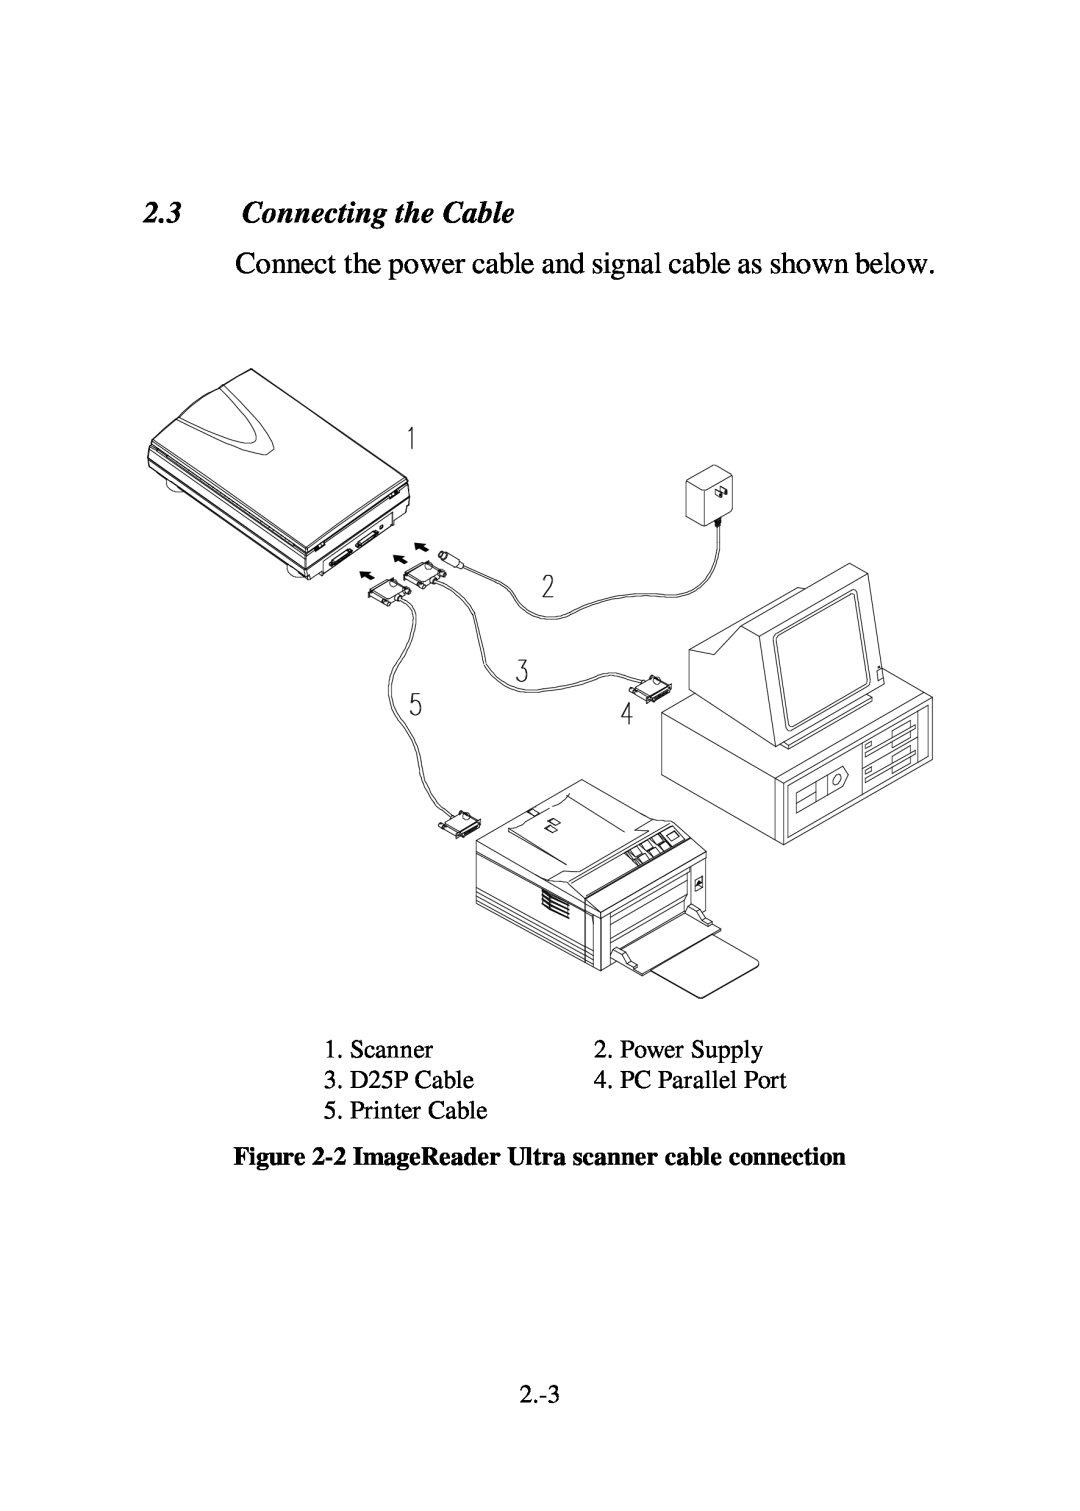 IBM Ricoh FB735 user manual Connecting the Cable, Connect the power cable and signal cable as shown below 